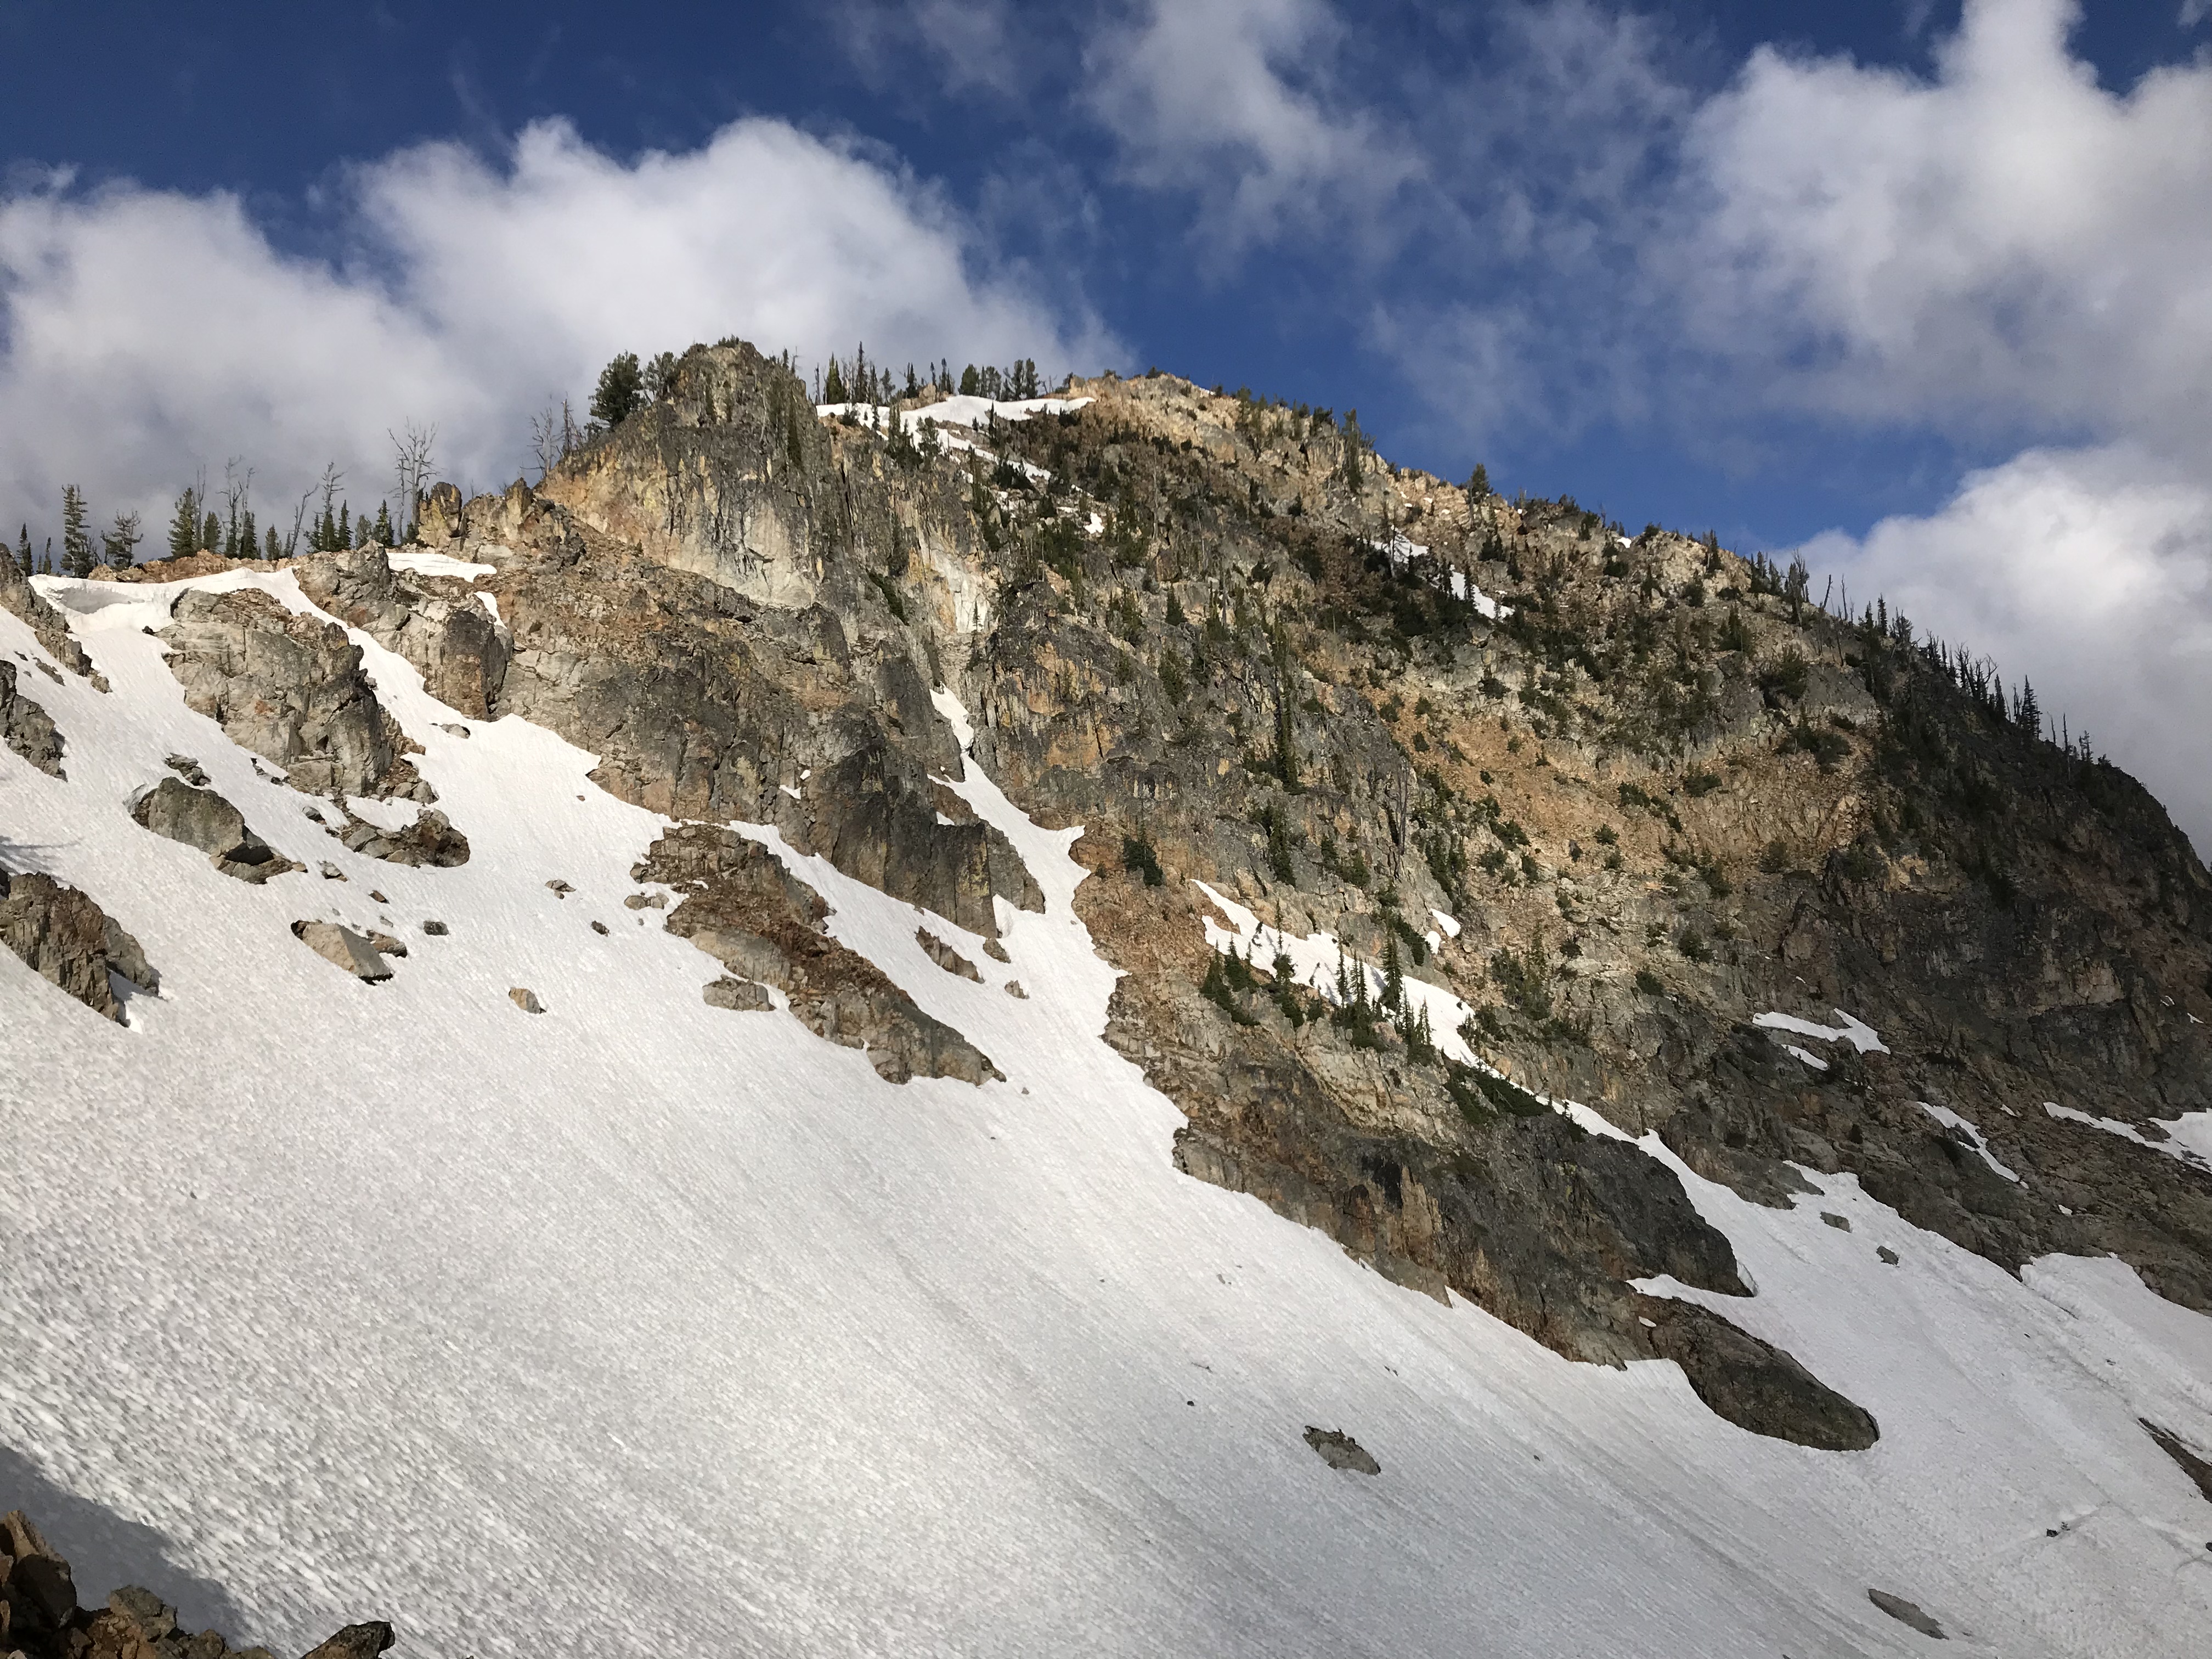 The summit of Crater Peak with the west ridge on the left.